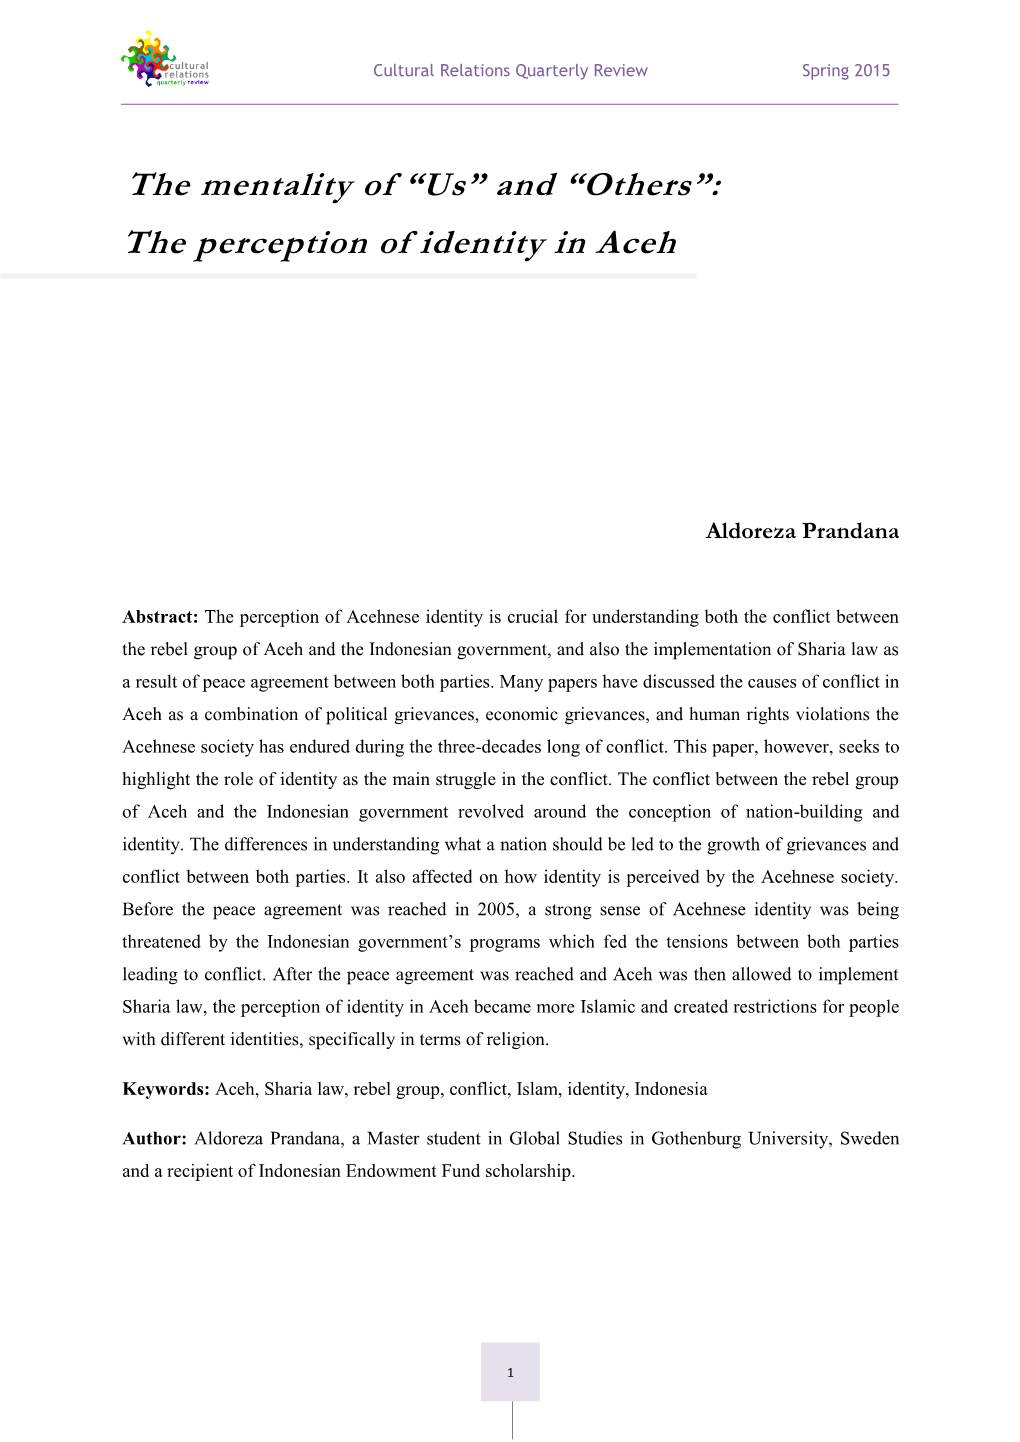 The Perception of Identity in Aceh